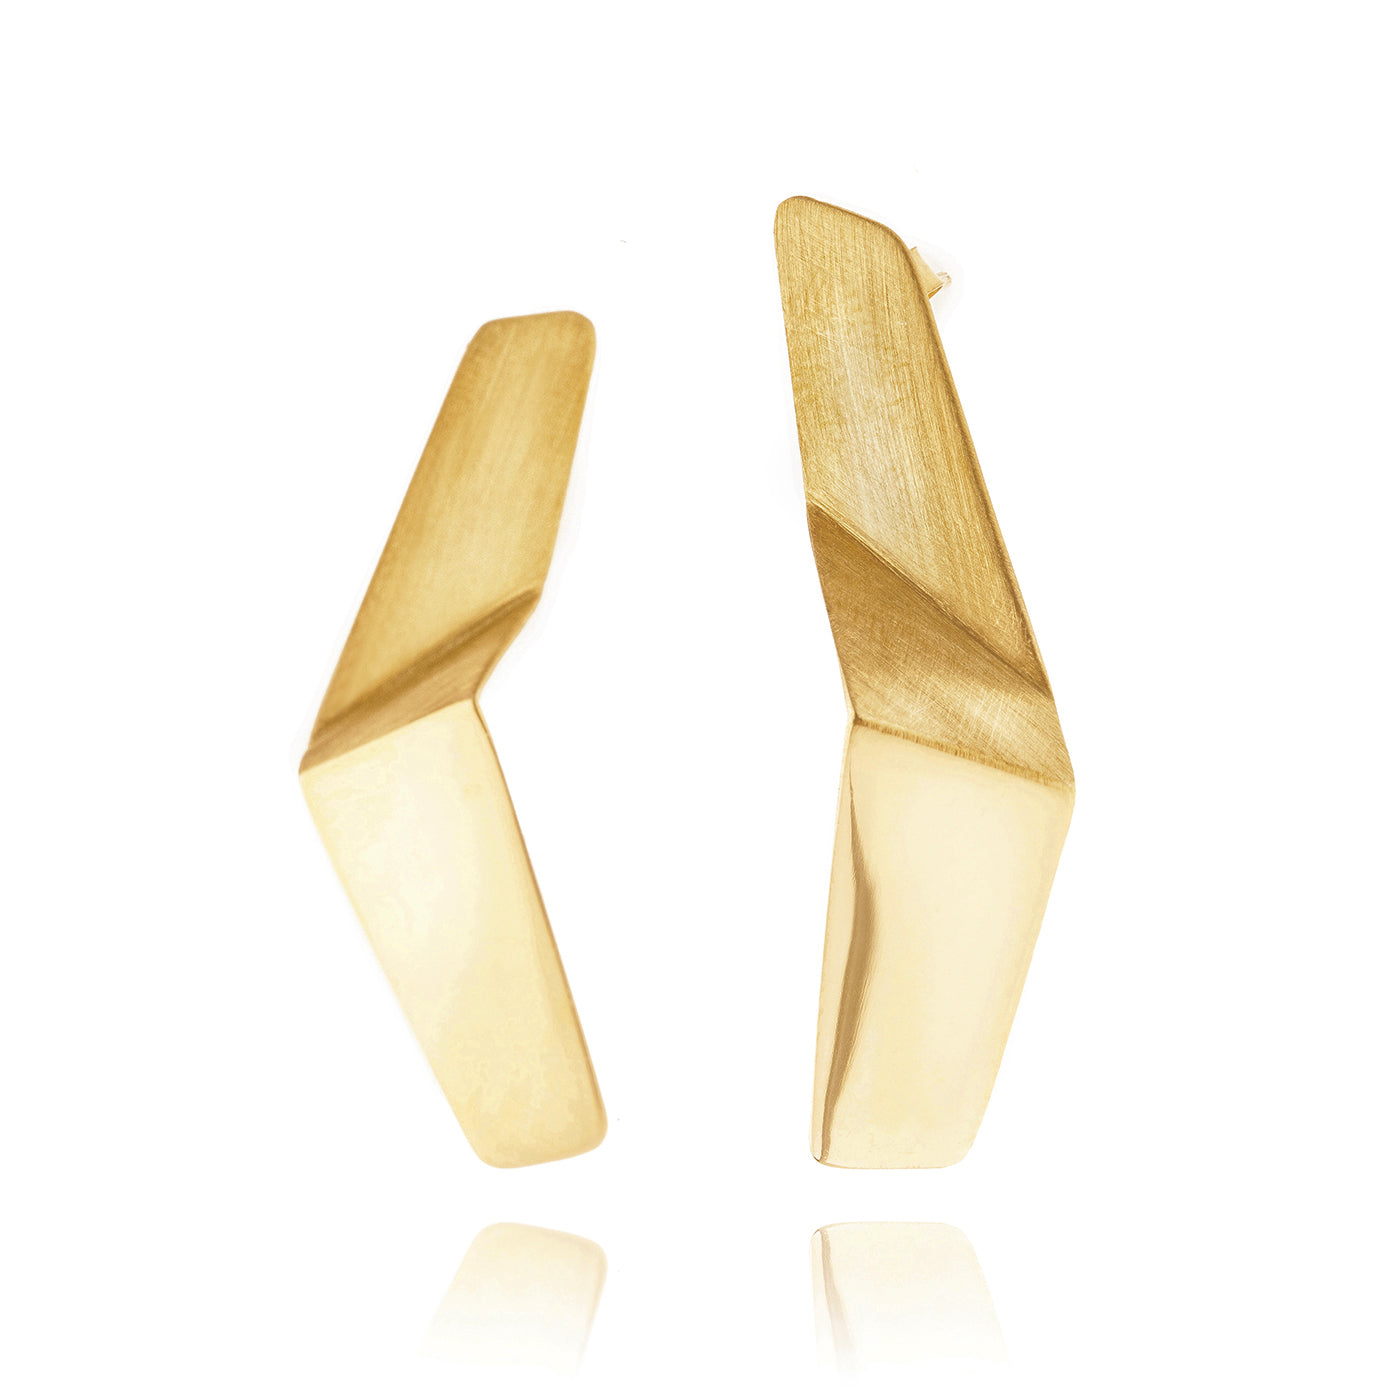 Mysterium Collection Gold-Plated Sterling Silver Bent Strip Earrings